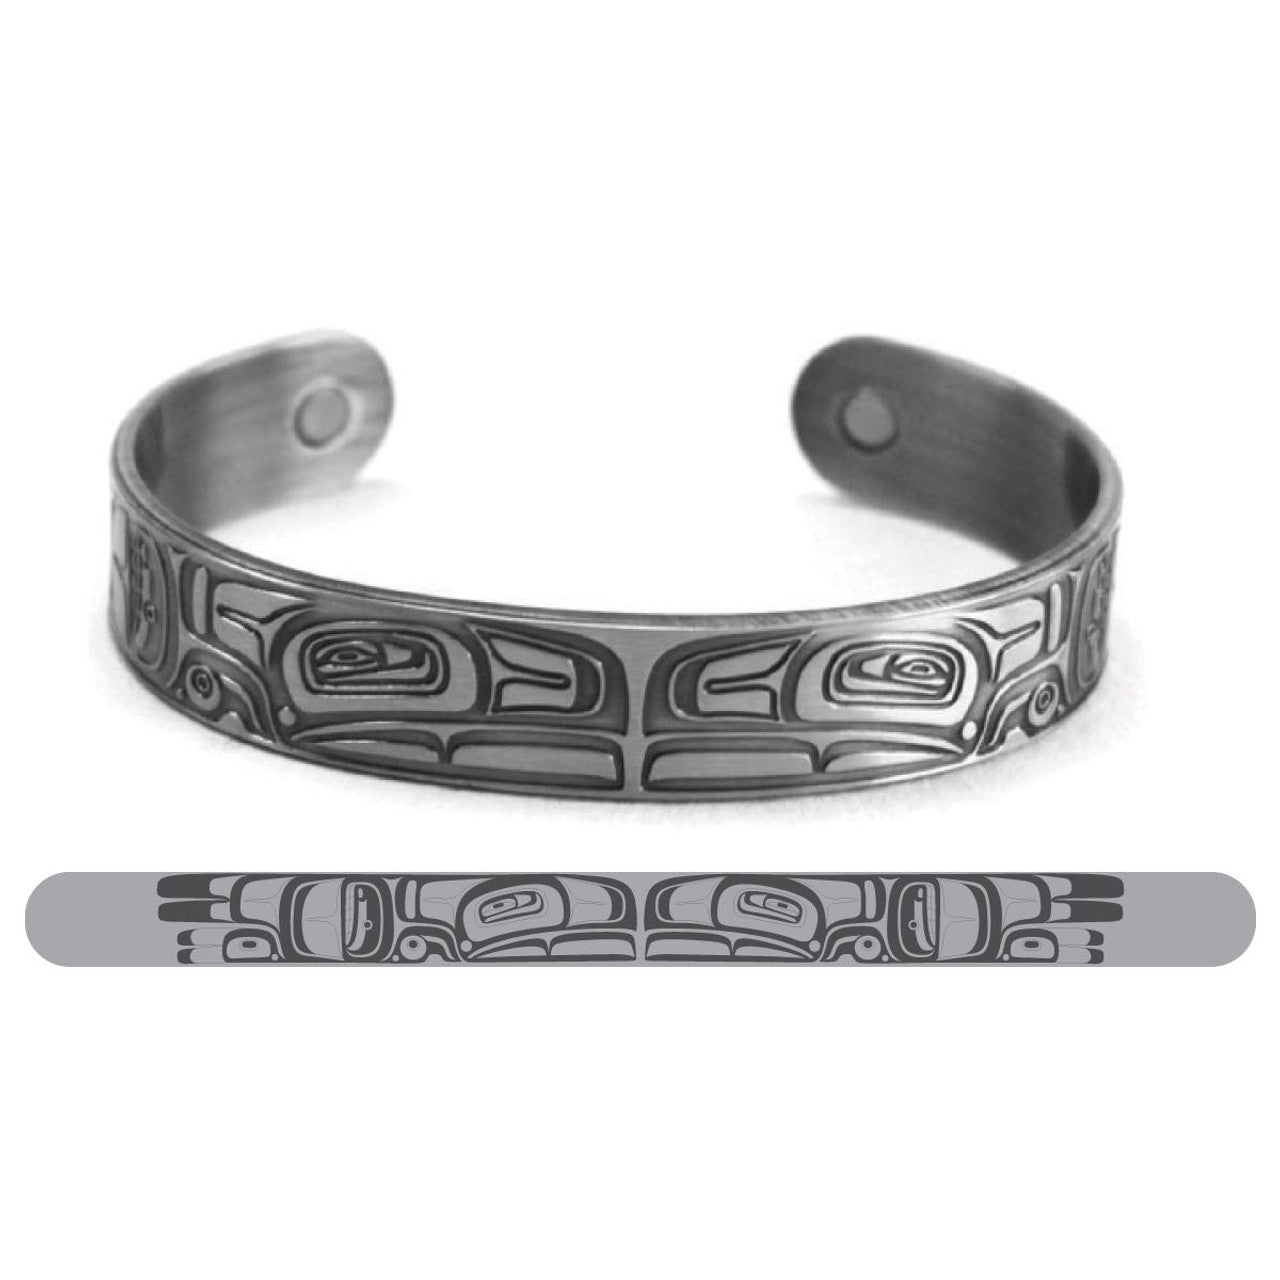 BRUSHED SILVER BRACELETS - Thunderbird - Abr2 - House of Himwitsa Native Art Gallery and Gifts